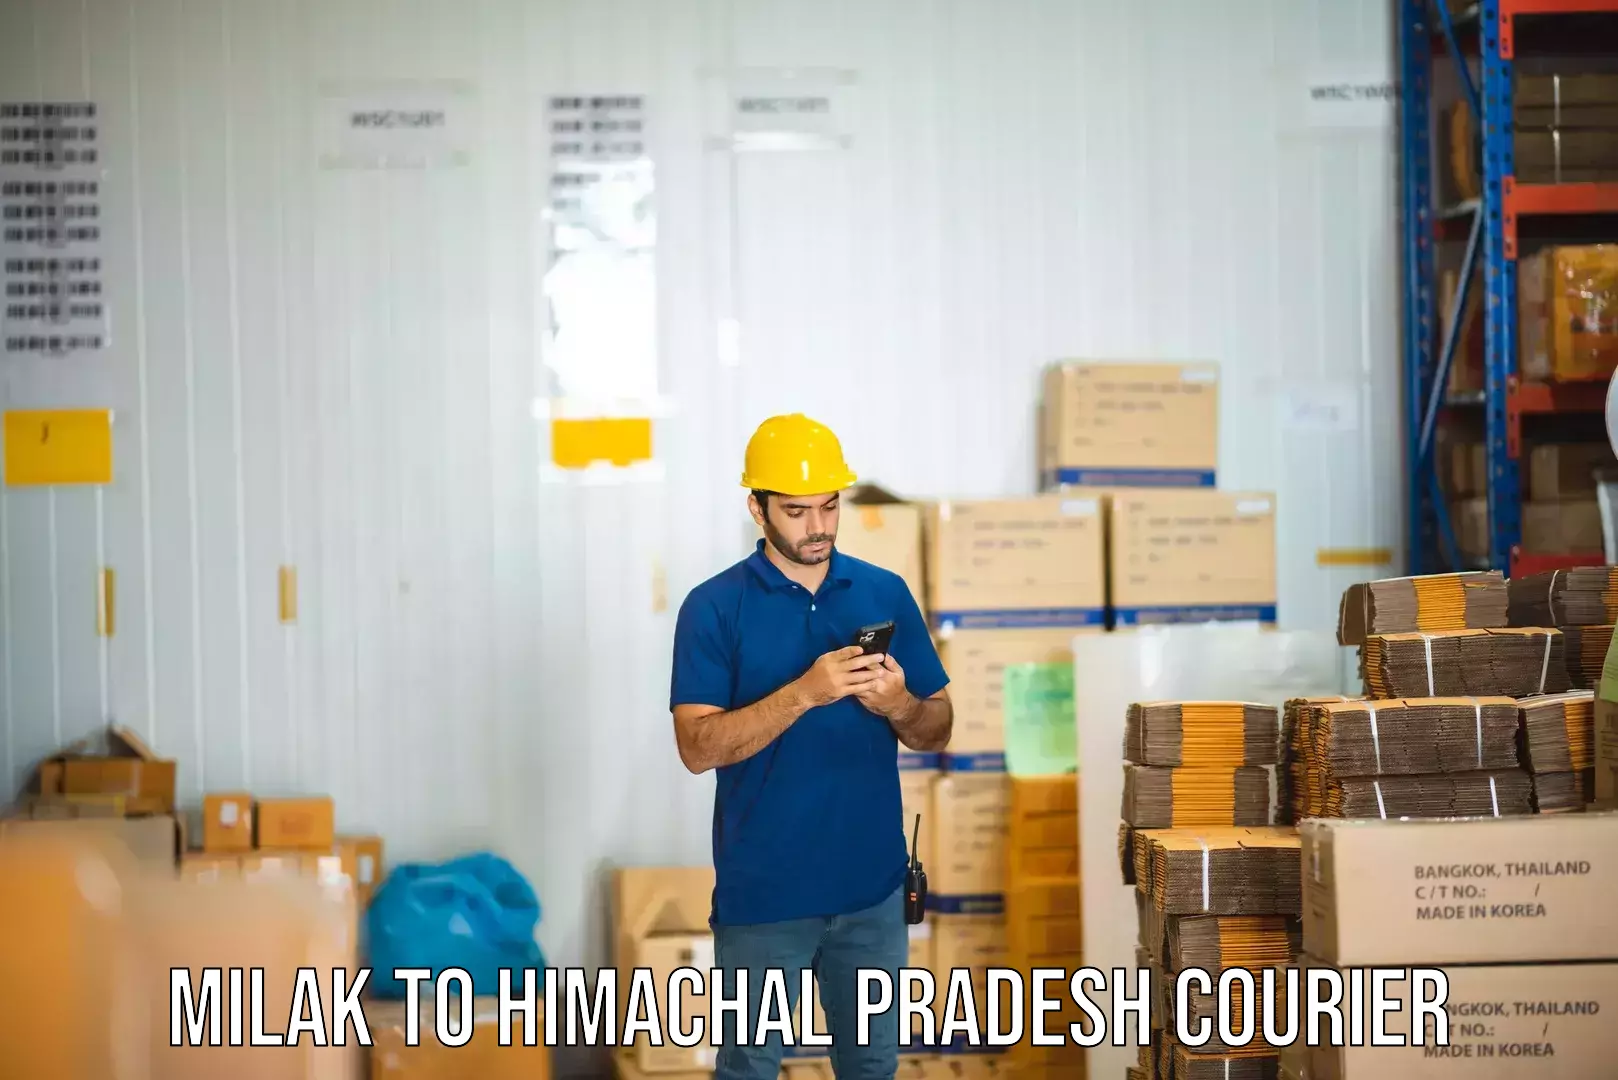 Overnight delivery services Milak to Himachal Pradesh